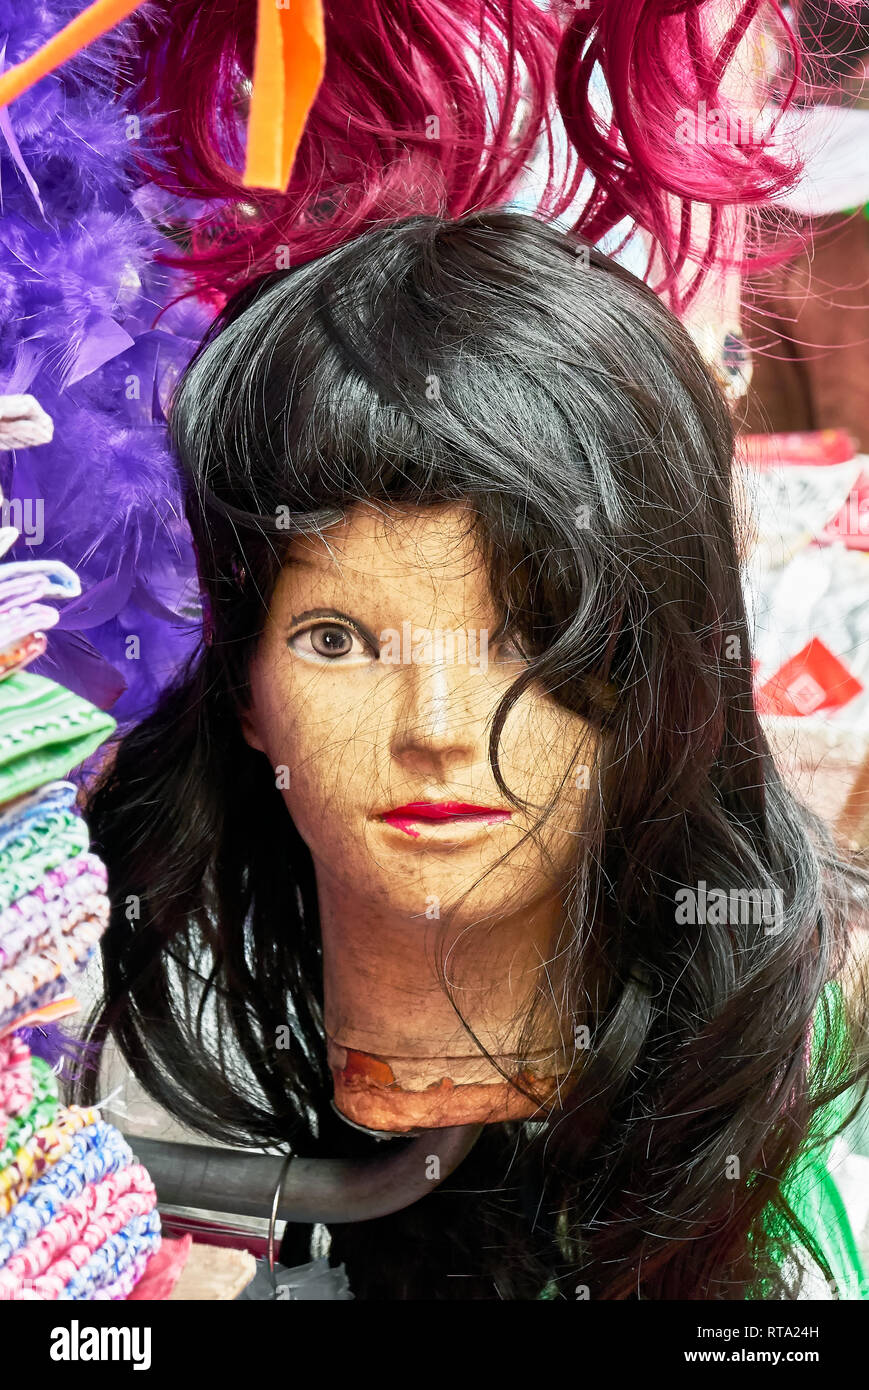 One female young looking mannequin head, looking straight into the camera, is wearing a black long wig, surrounded by red colored hair and clothes Stock Photo